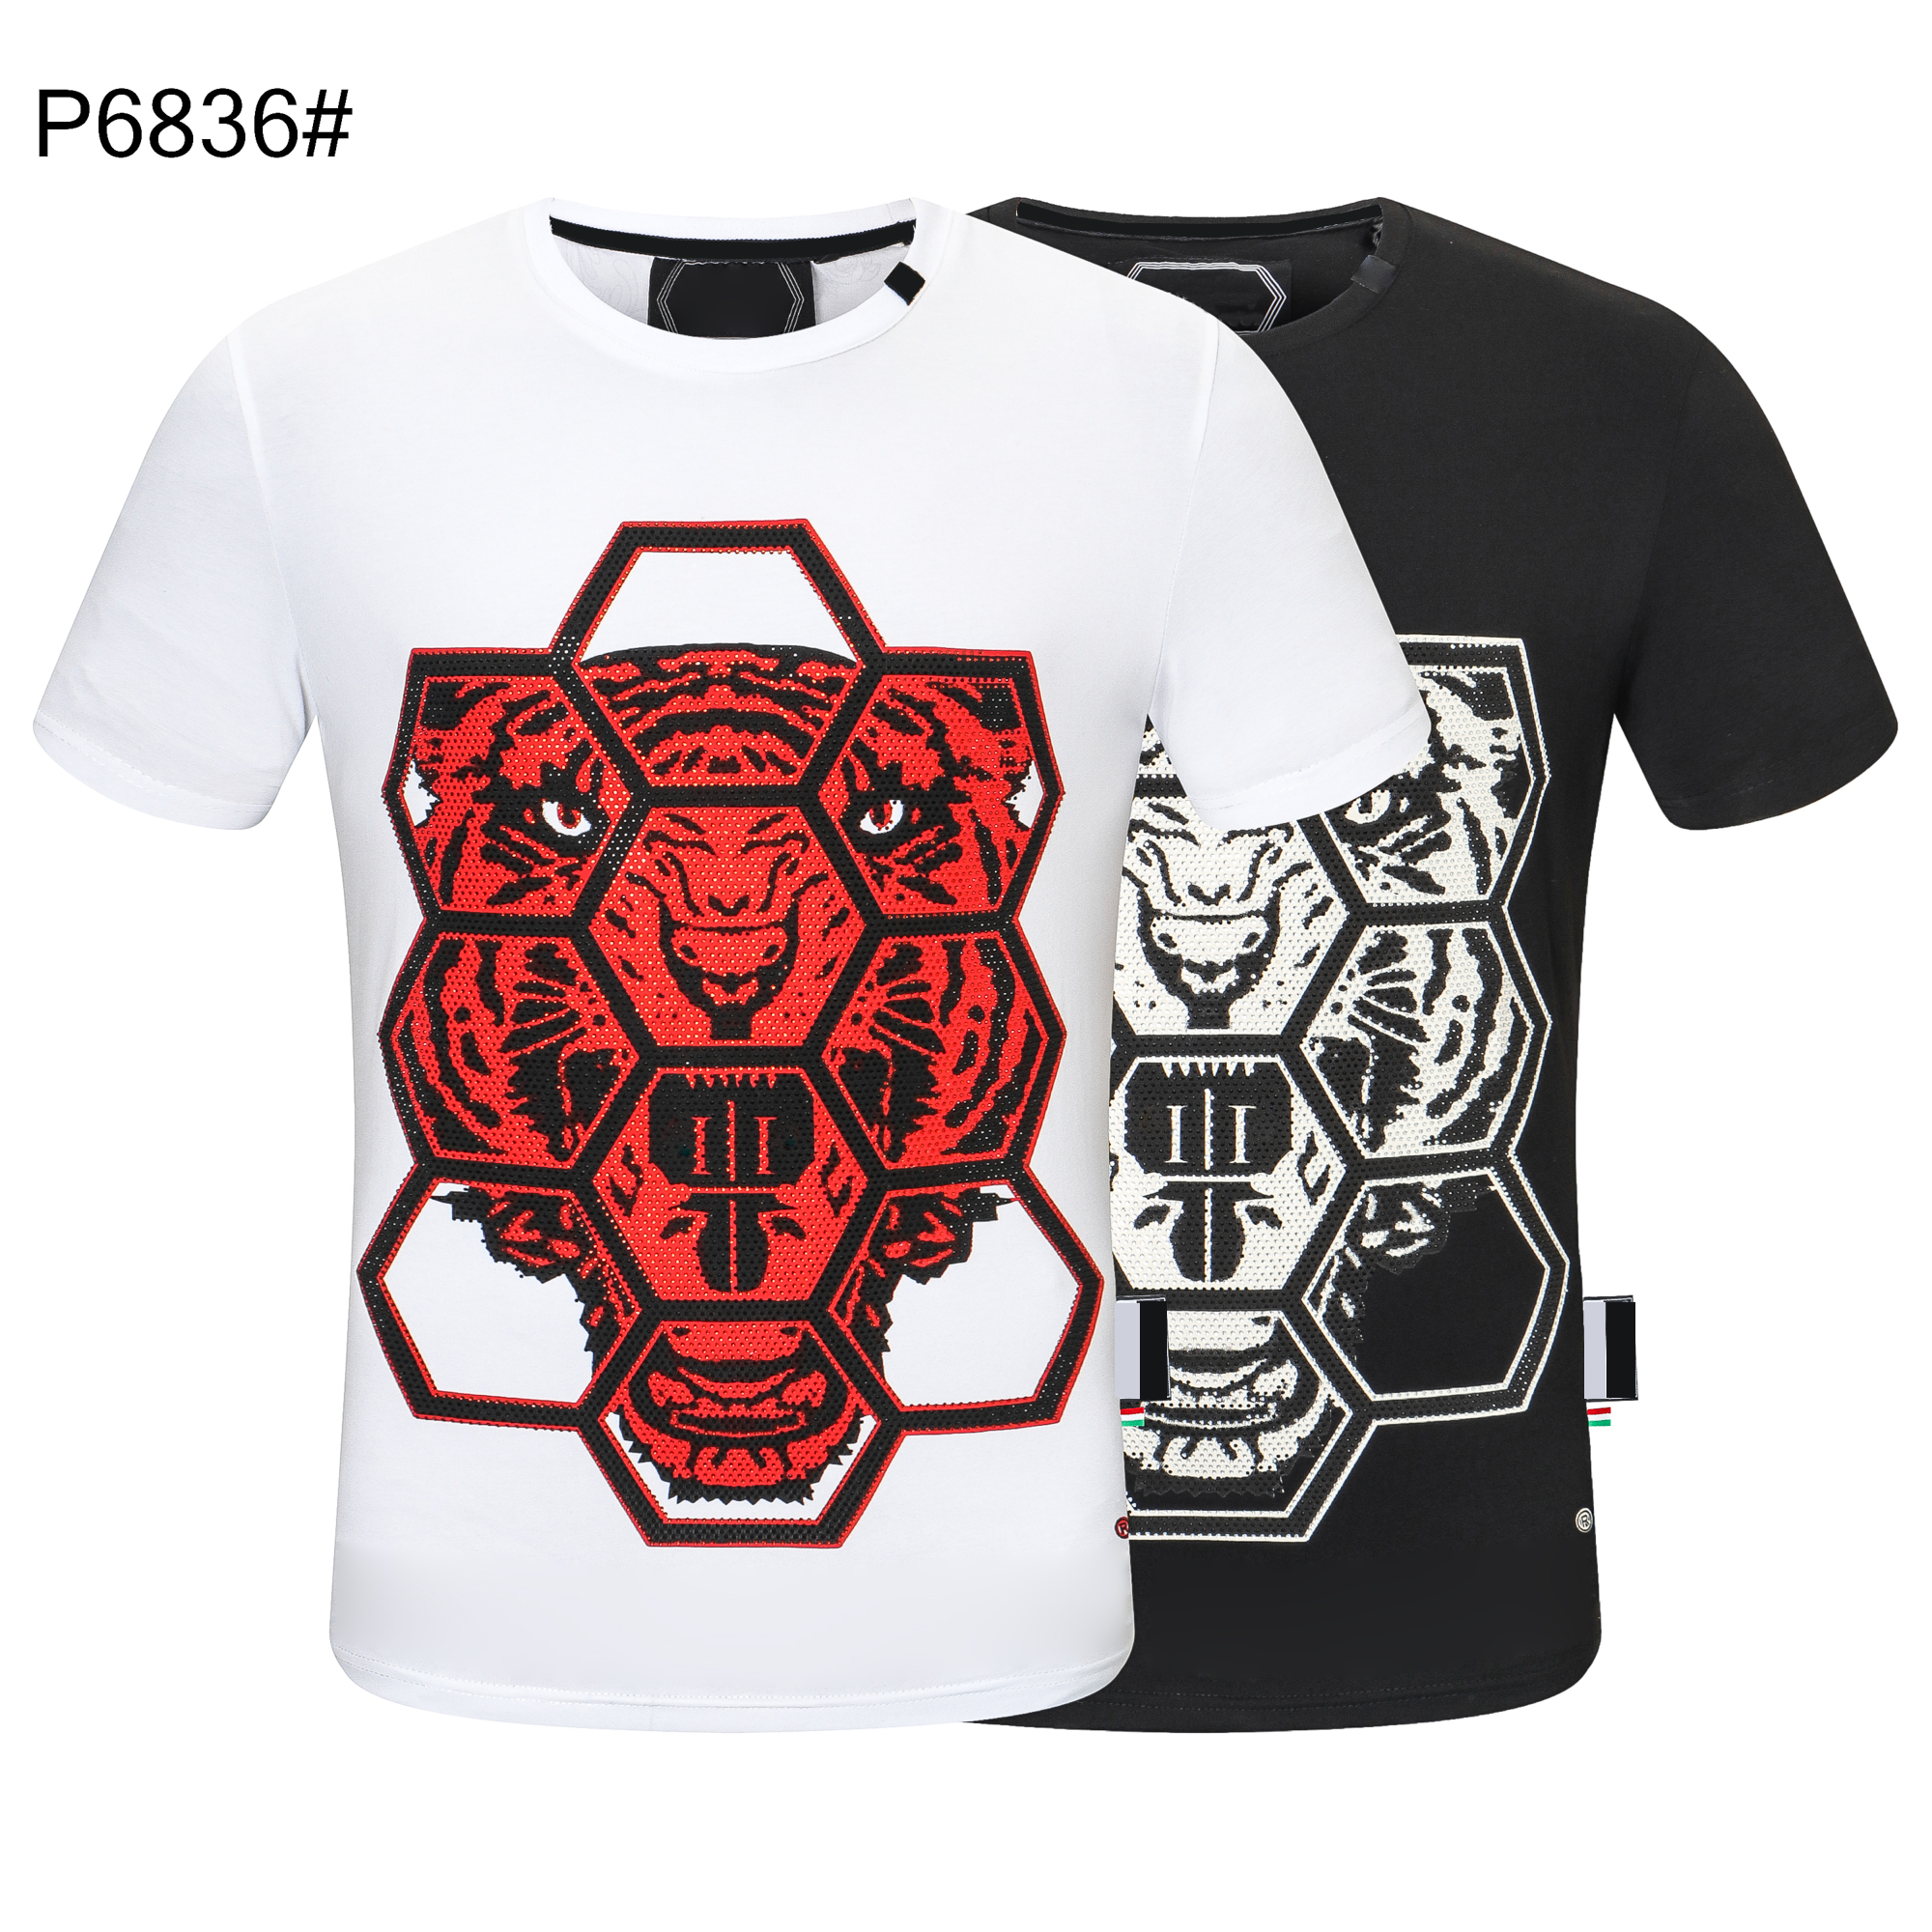 

Men SKULL T shirt Geometric Pattern Summer Casual Tee Fashion Ins Style Top Streetwear Loose High Quality Sport Hip-hop Mature Trendy T Shirts 05, More styles 897454564